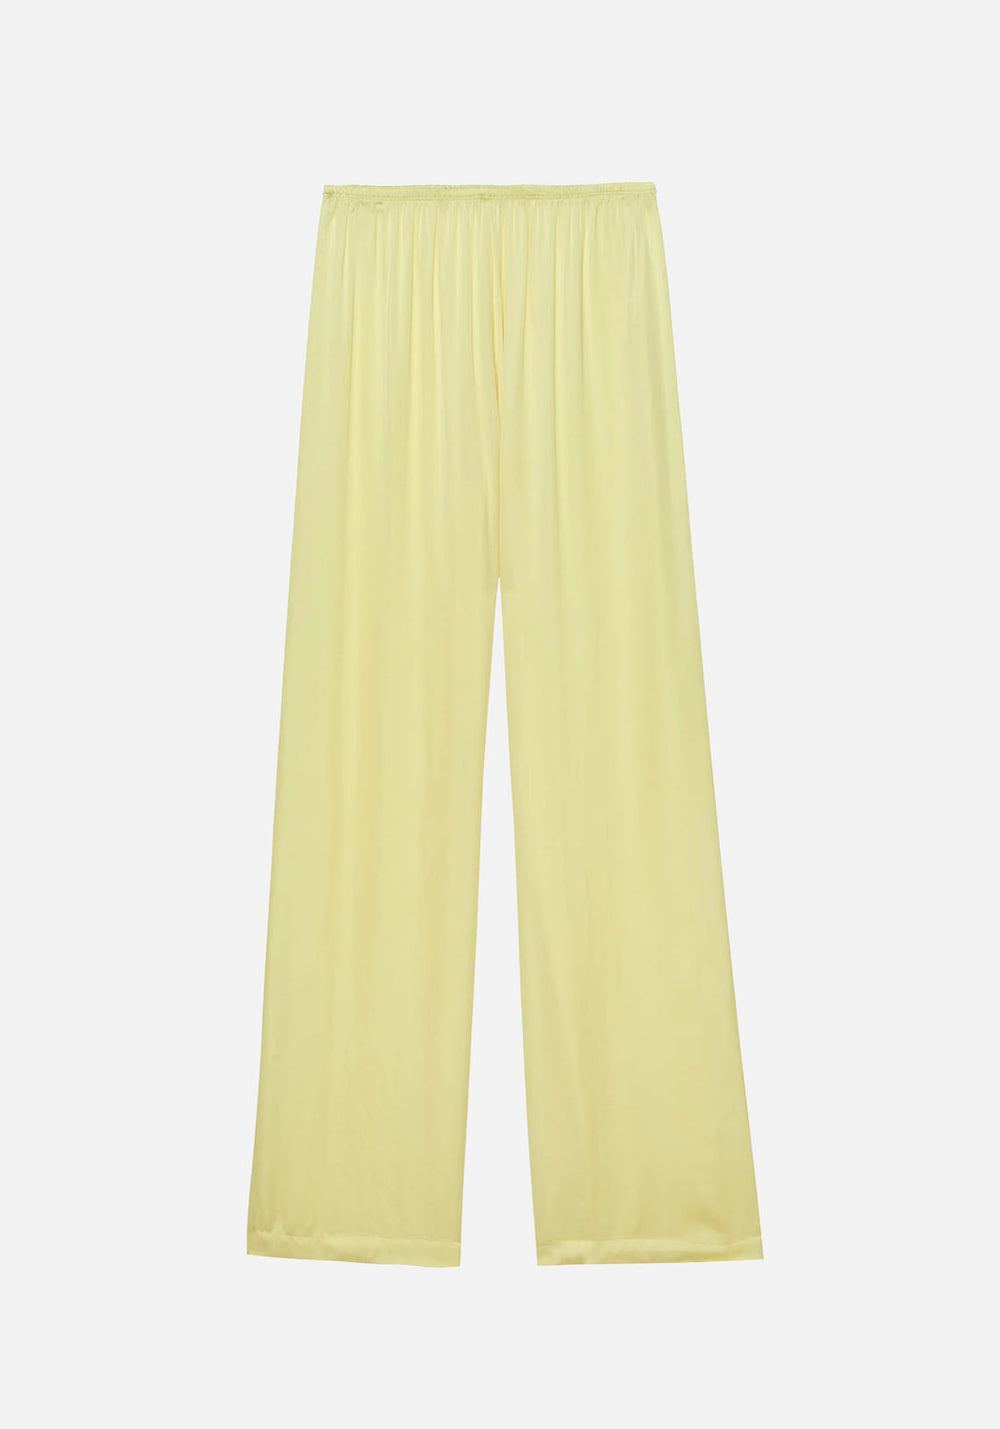 THE SILKY SIMPLE PANT CORN